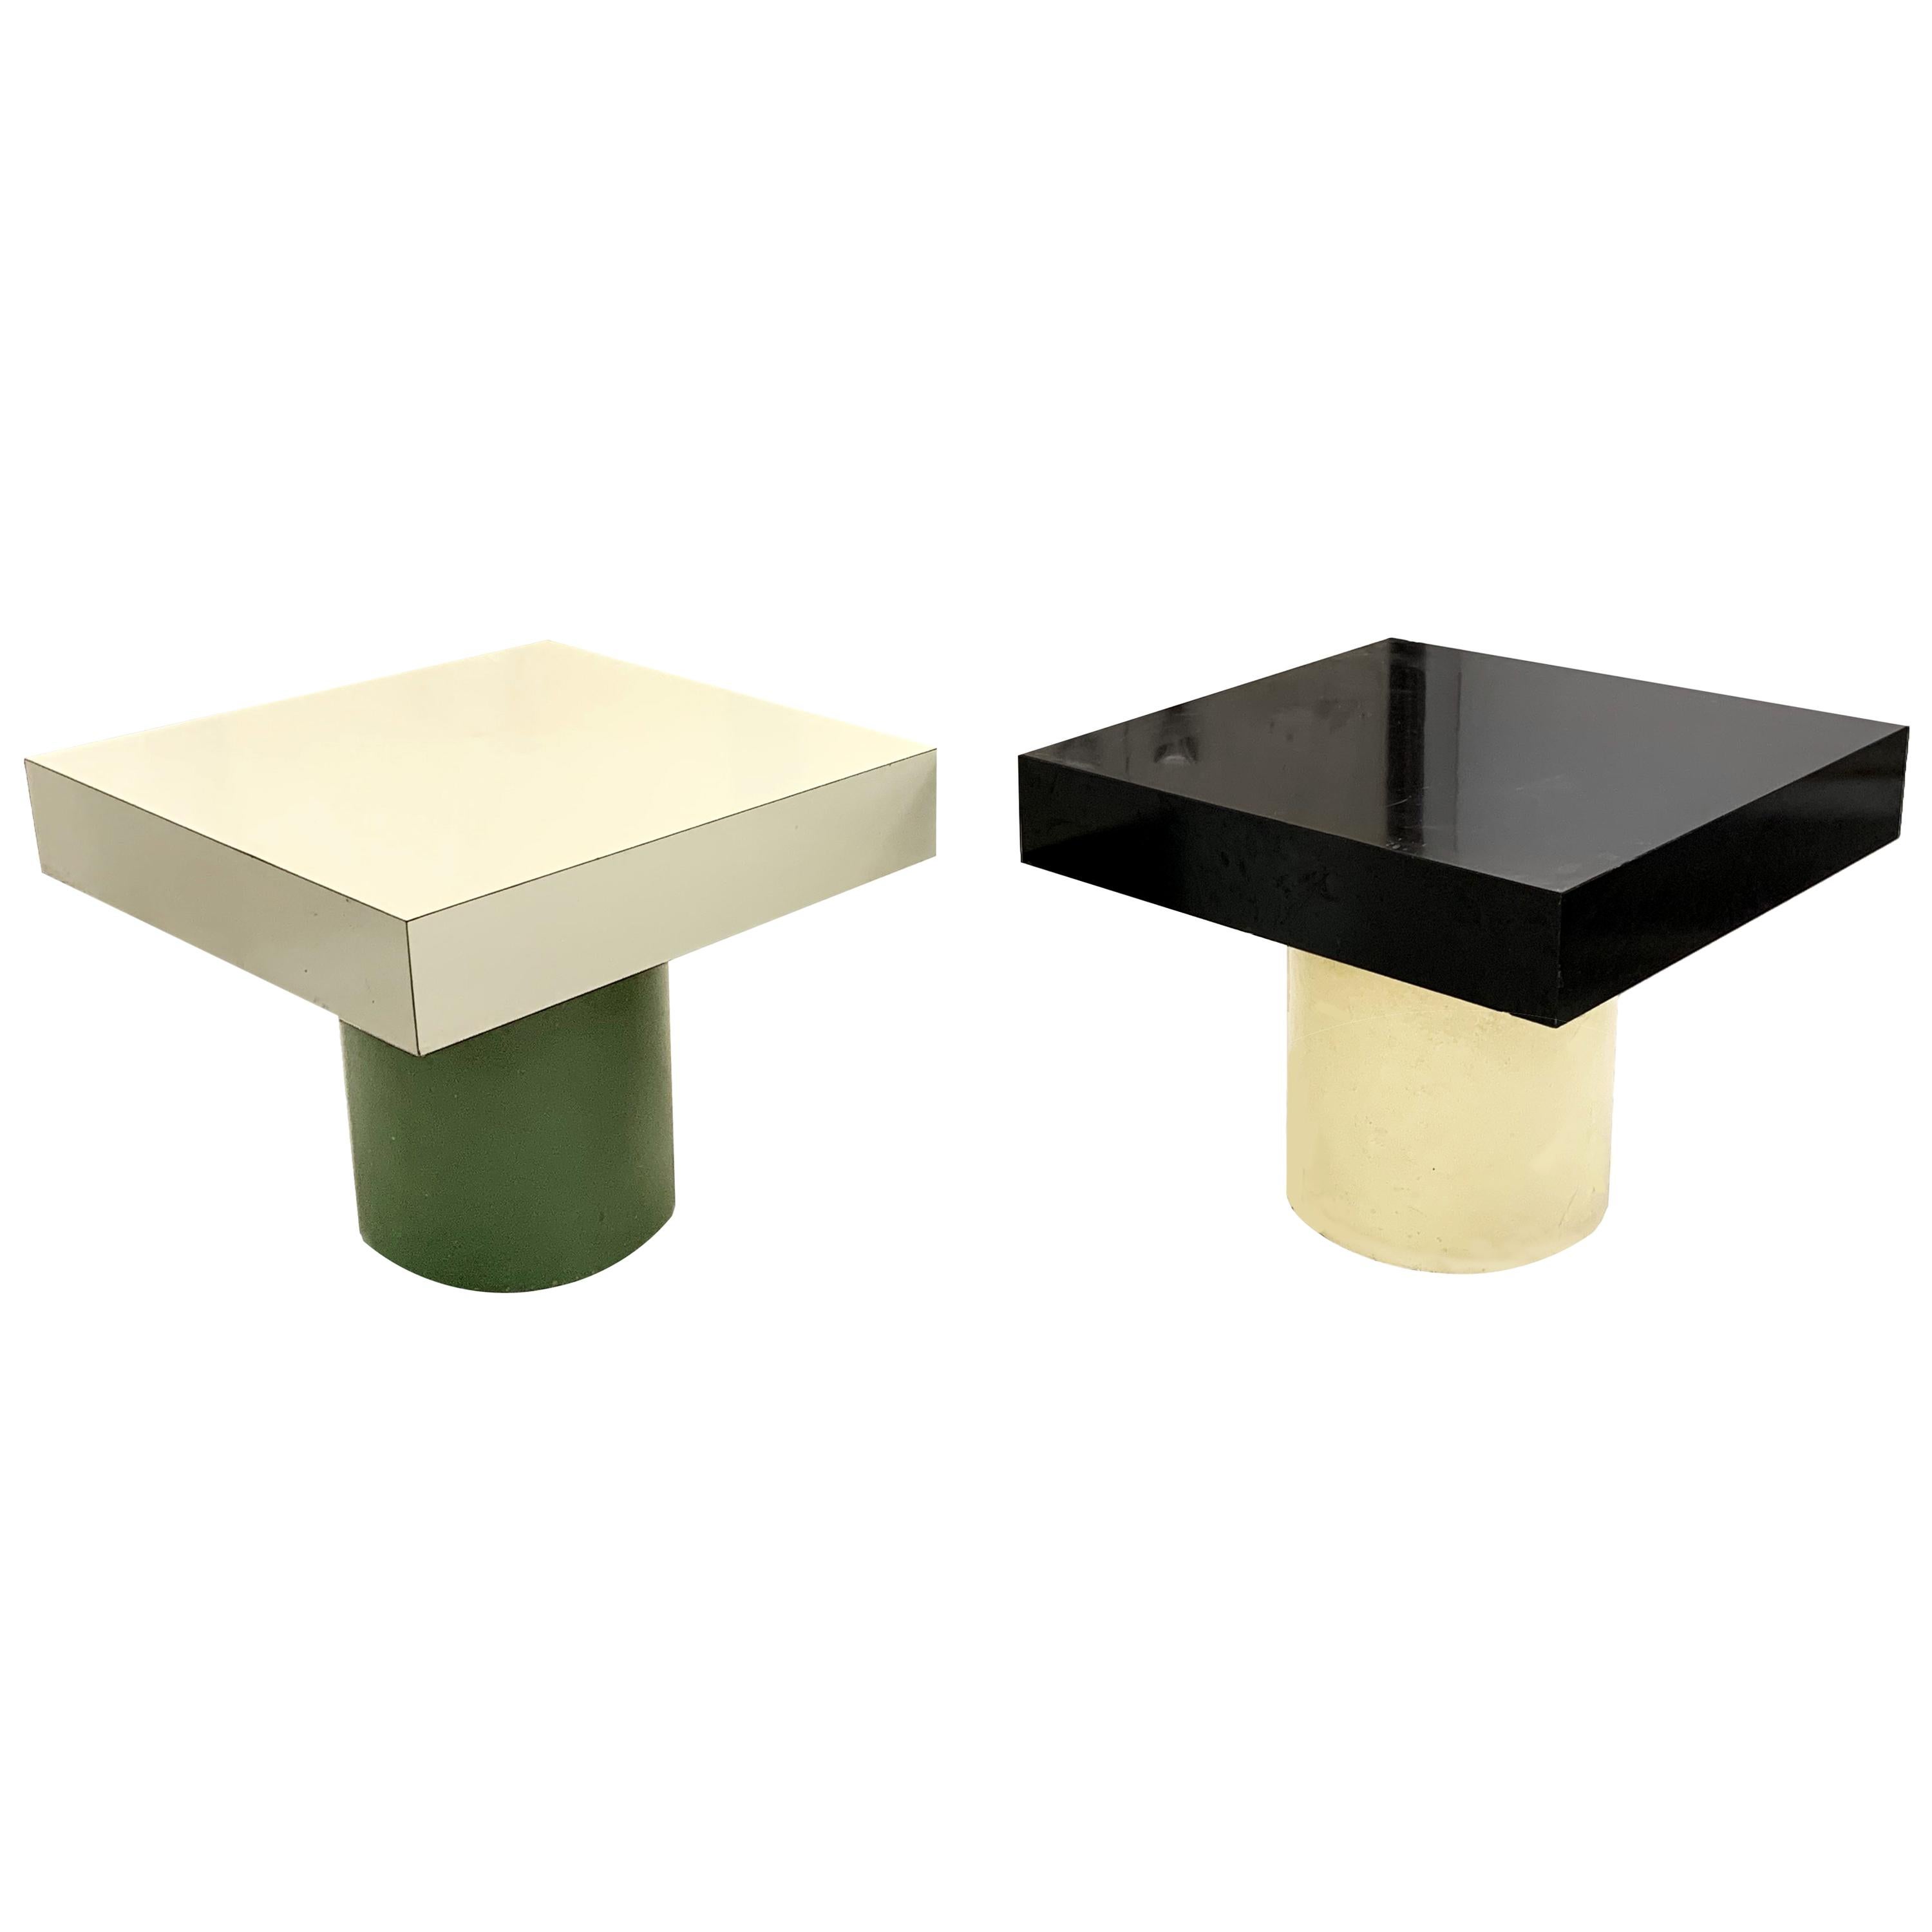 Pair of Side Tables in Black and White Formica, Round Base, 1970s Italy Laminate